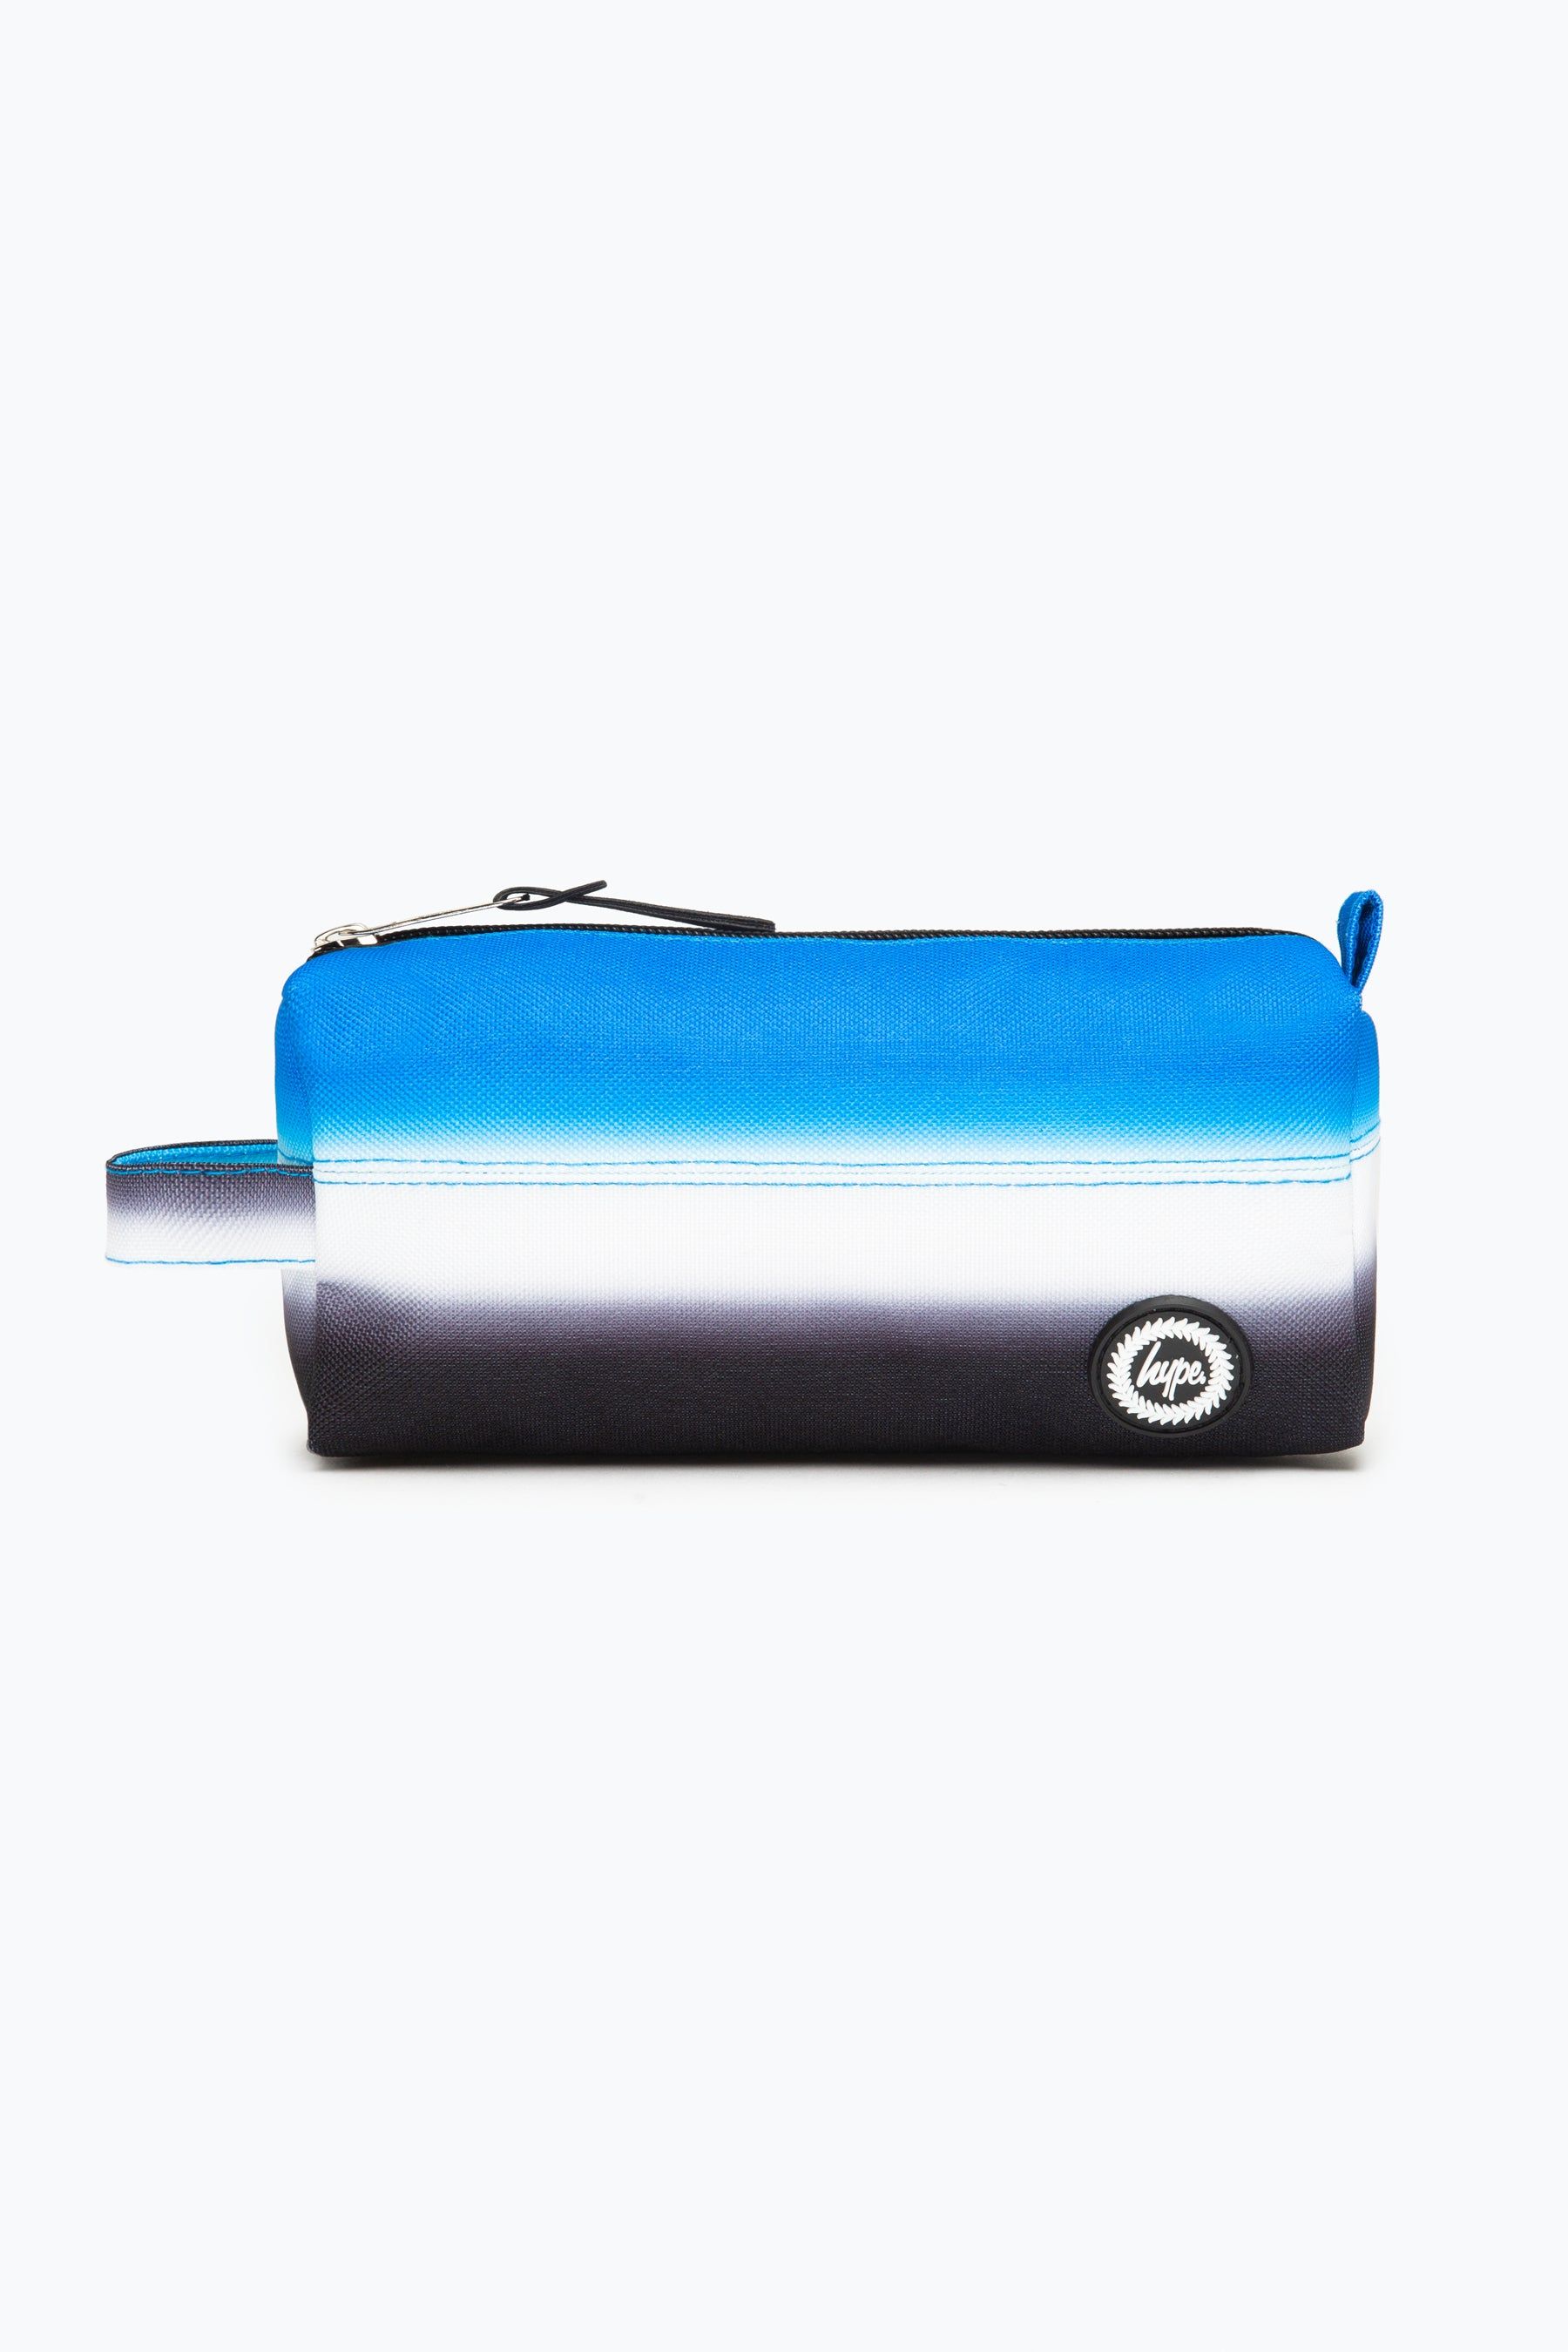 Meet the HYPE. Black Blue Pencil Case. Designed in our standard unisex pencil case shape and style, a winner for everyone. A perfect home for your stationery, pencils, pens, rulers, highlighters, and even small snacks, the last packet of mini cookies, stash them in your new HYPE. pencil case. The design features our signature gradient effect in a black and blue colour palette. Finished with embossed inside lining, rubberised iconic HYPE. crest logo and grab handle. Check out the matching lunch bag and backpack to complete the set. Wipe clean only.